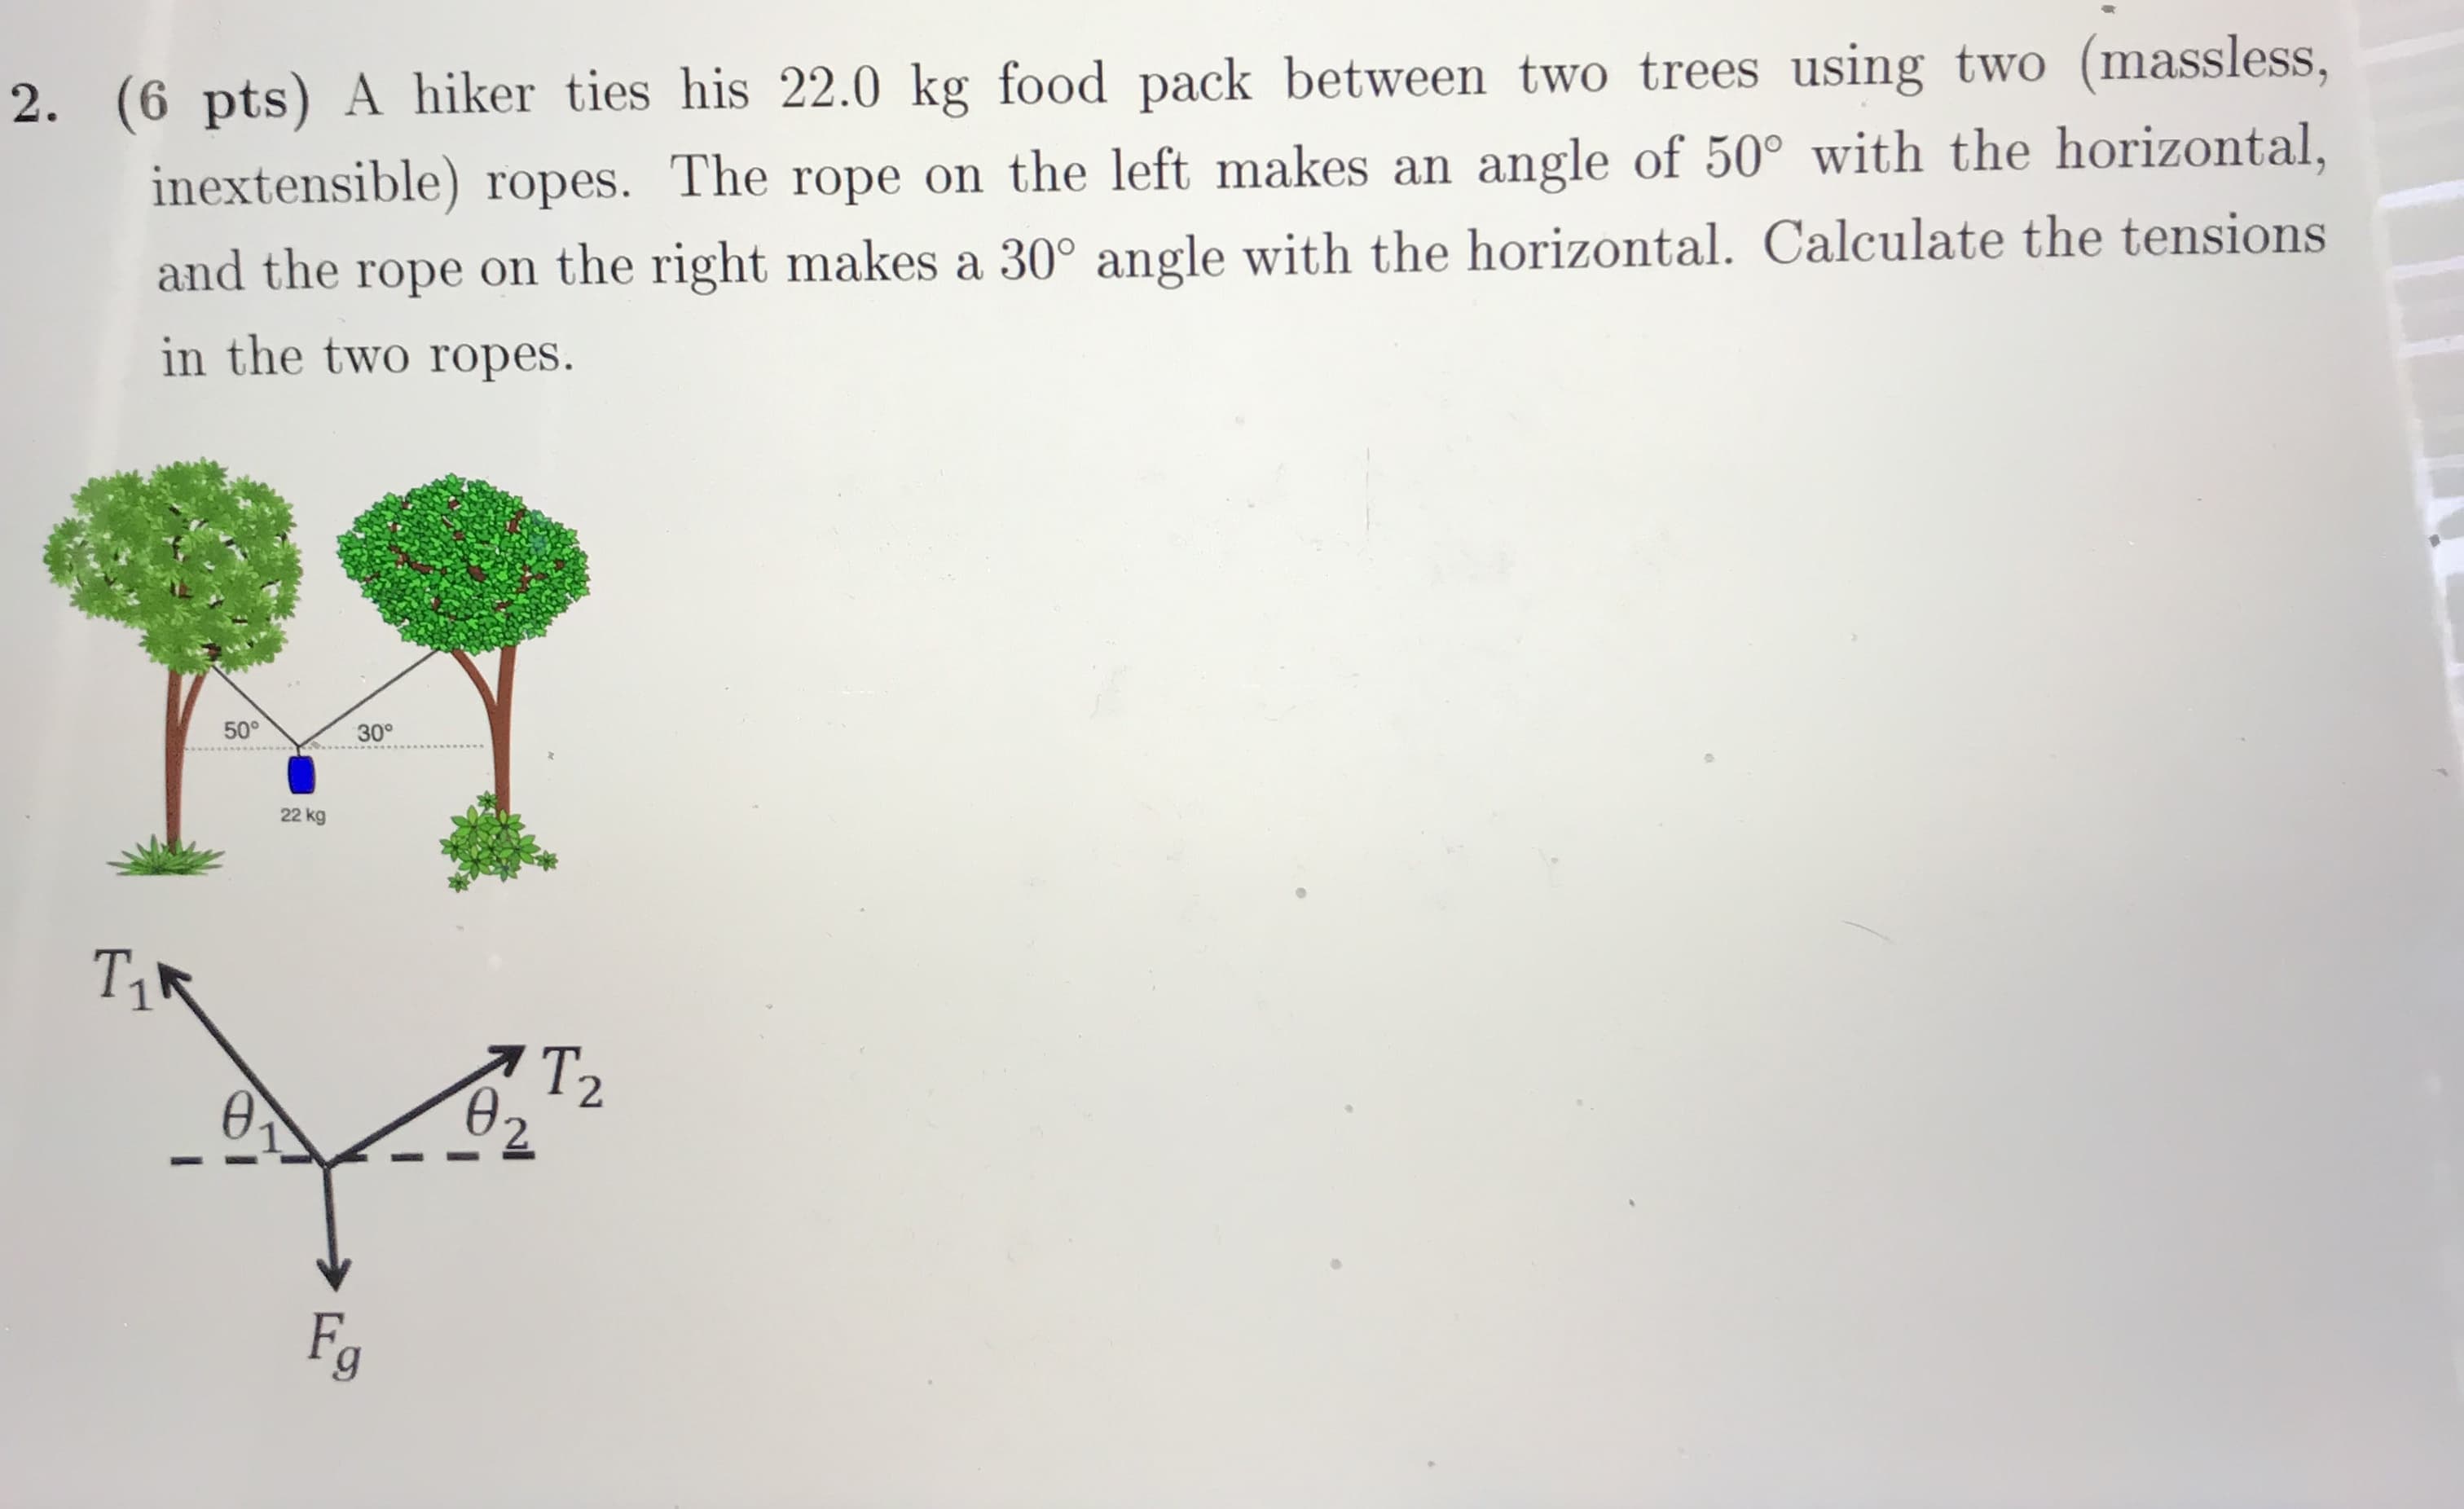 2. (6 pts) A hiker ties his 22.0 kg food pack between two trees using two (massless,
inextensible) ropes. The rope on the left makes an angle of 50° with the horizontal,
and the rope on the right makes a 30° angle with the horizontal. Calculate the tensions
in the two ropes.
50°
30°
22 kg
T2
Fg
